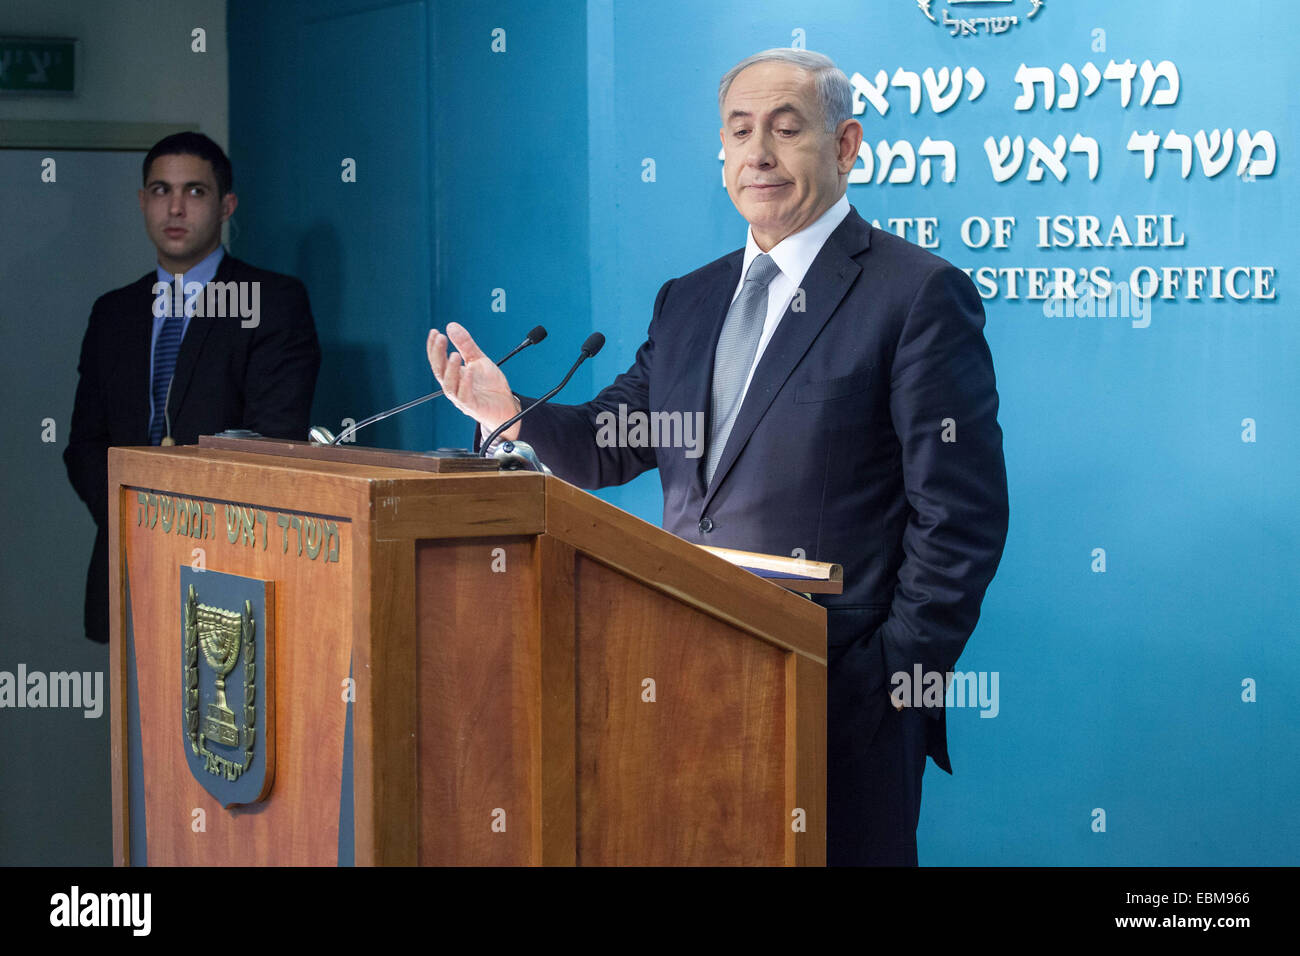 Jerusalem. 2nd Dec, 2014. Israeli Prime Minister Benjamin Netanyahu addresses a press conference at the Prime Minister's office in Jerusalem, on Dec. 2, 2014. Israeli Prime Minister Benjamin Netanyahu announced his support for dispersing the Knesset (parliament) and conducting early elections amid a coalition crisis. During a press conference at his Jerusalem office, Netanyahu also said he has ordered to fire Justice Minister Tzipi Livni and Finance Minister Yair Lapid, who he said plotted against him by outspokenly criticizing his policies. Credit:  JINI/Emil Salman/Xinhua/Alamy Live News Stock Photo